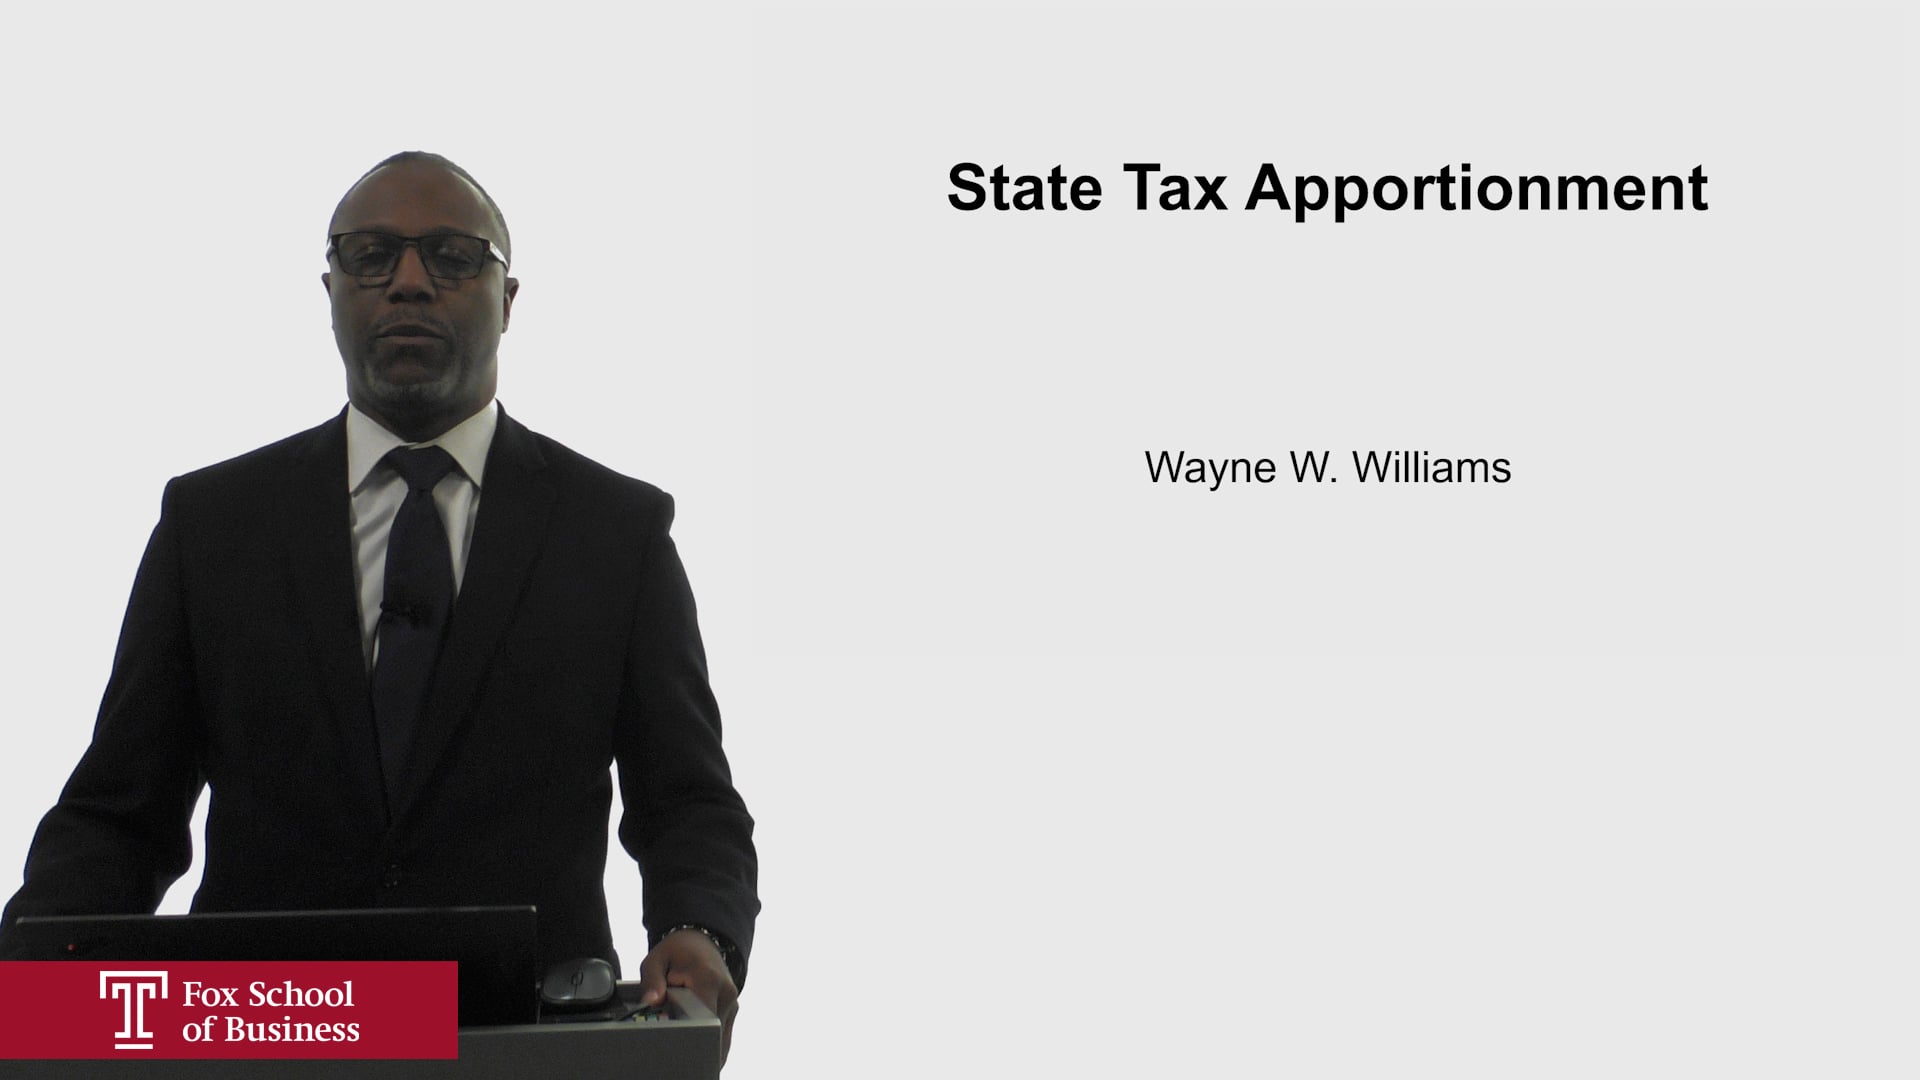 State Tax Apportionment